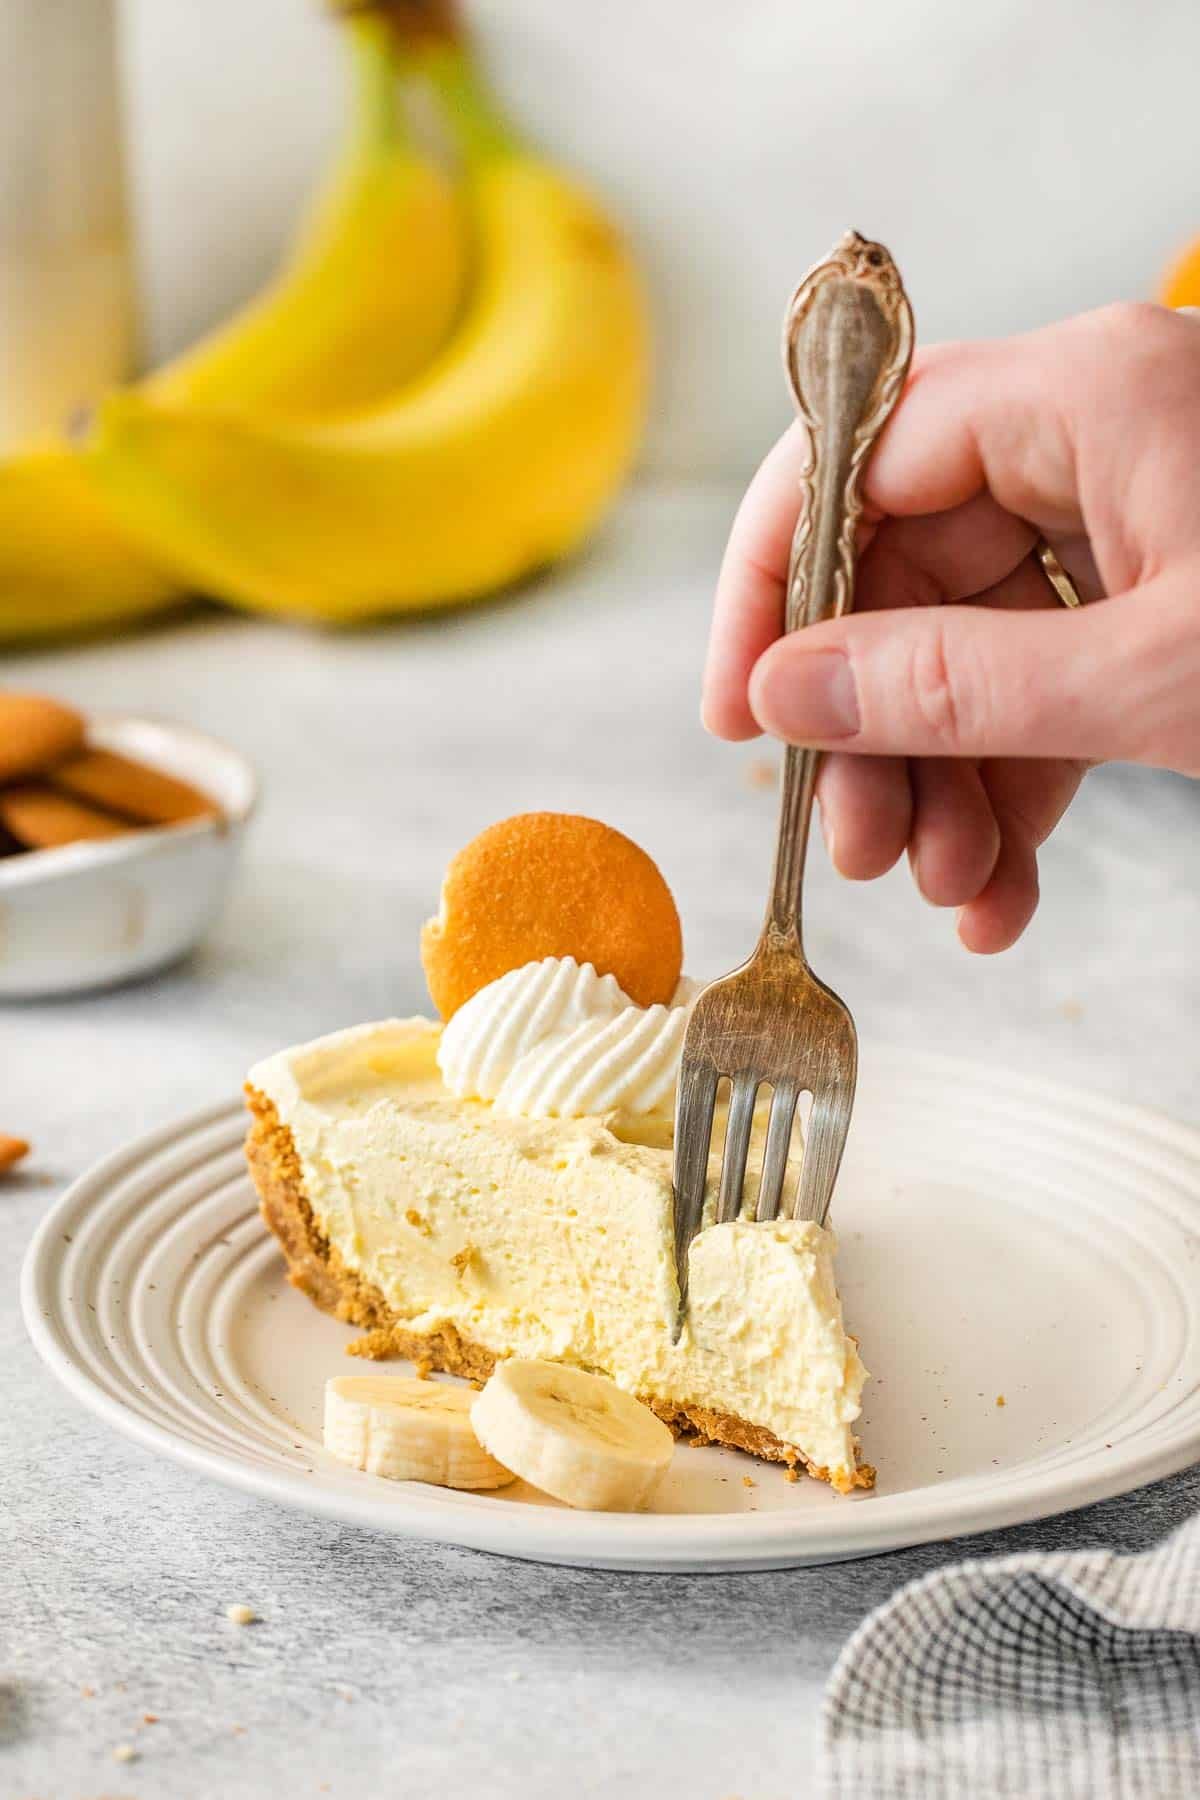 Silver fork inserted into a slice of banana pudding pie on white plate.